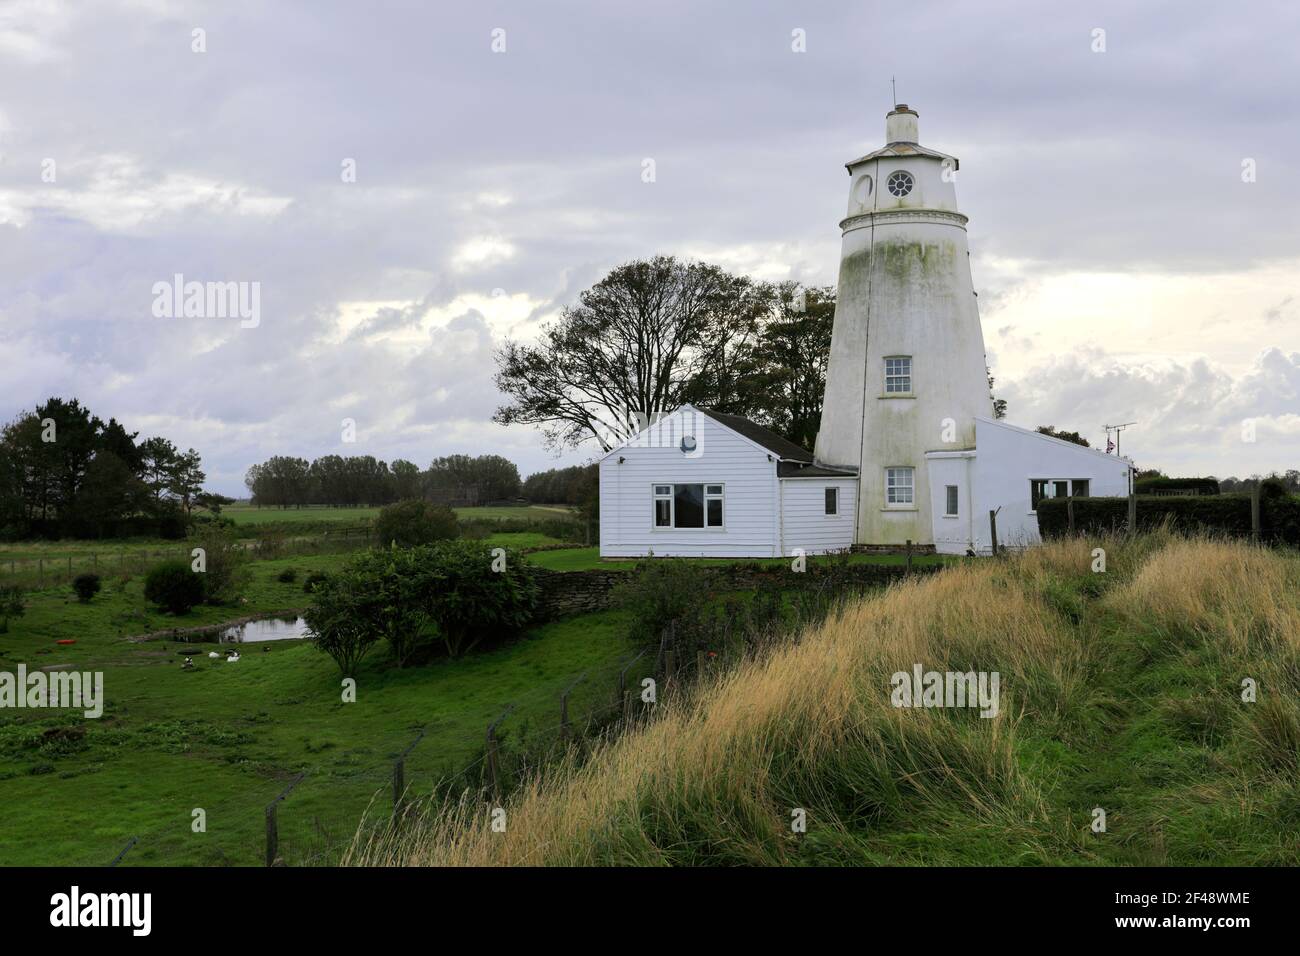 Sir Peter Scott Lighthouse, known as the East Lighthouse, River Nene, Sutton Bridge village, South Holland district, Lincolnshire, England. Stock Photo